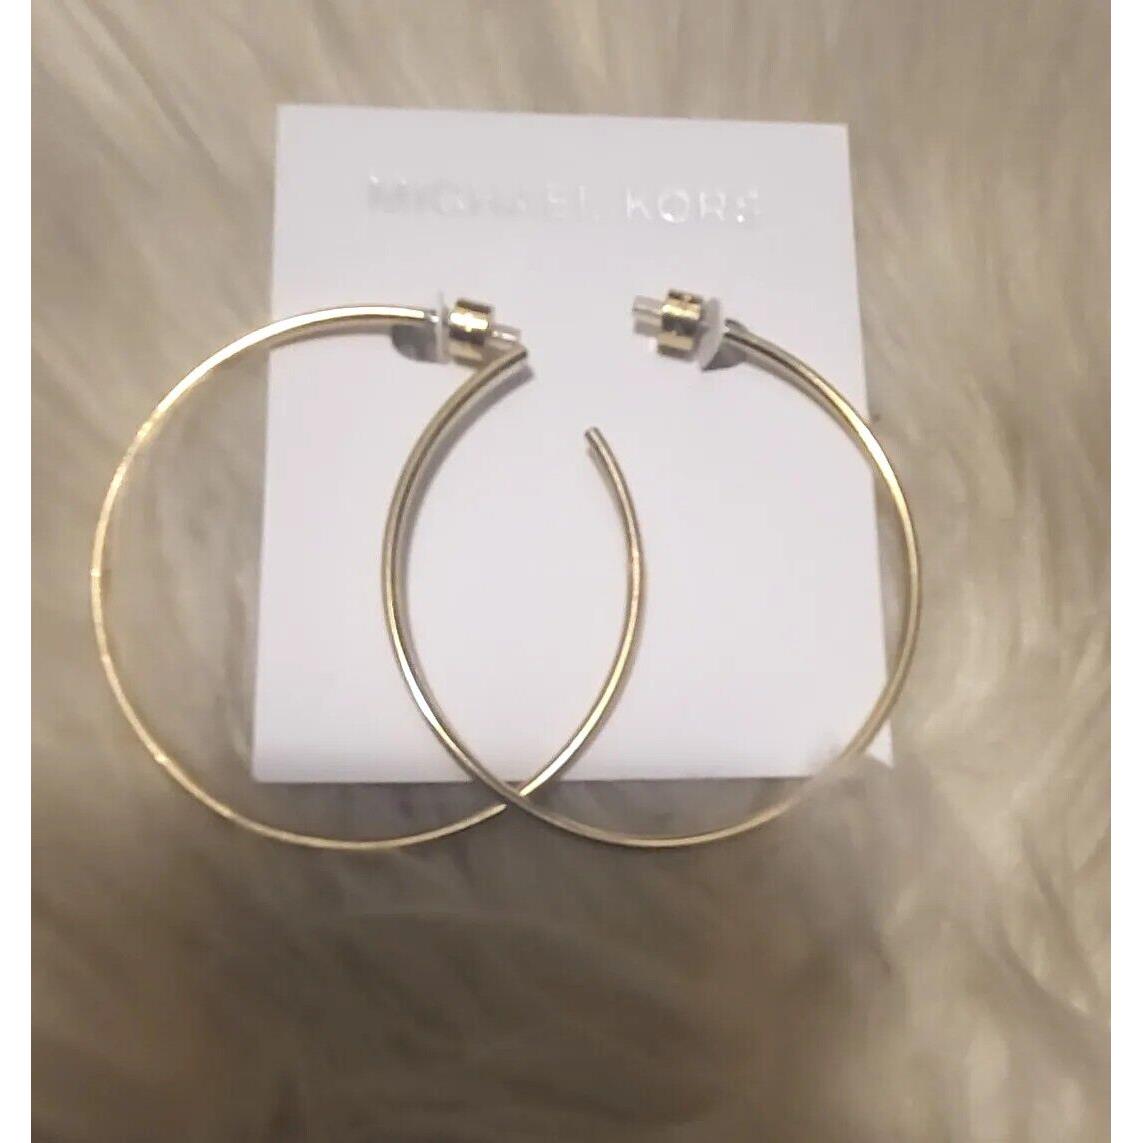 Michael Kors Jewelry Gold Tone Round Large Hoop Earrings Outlets